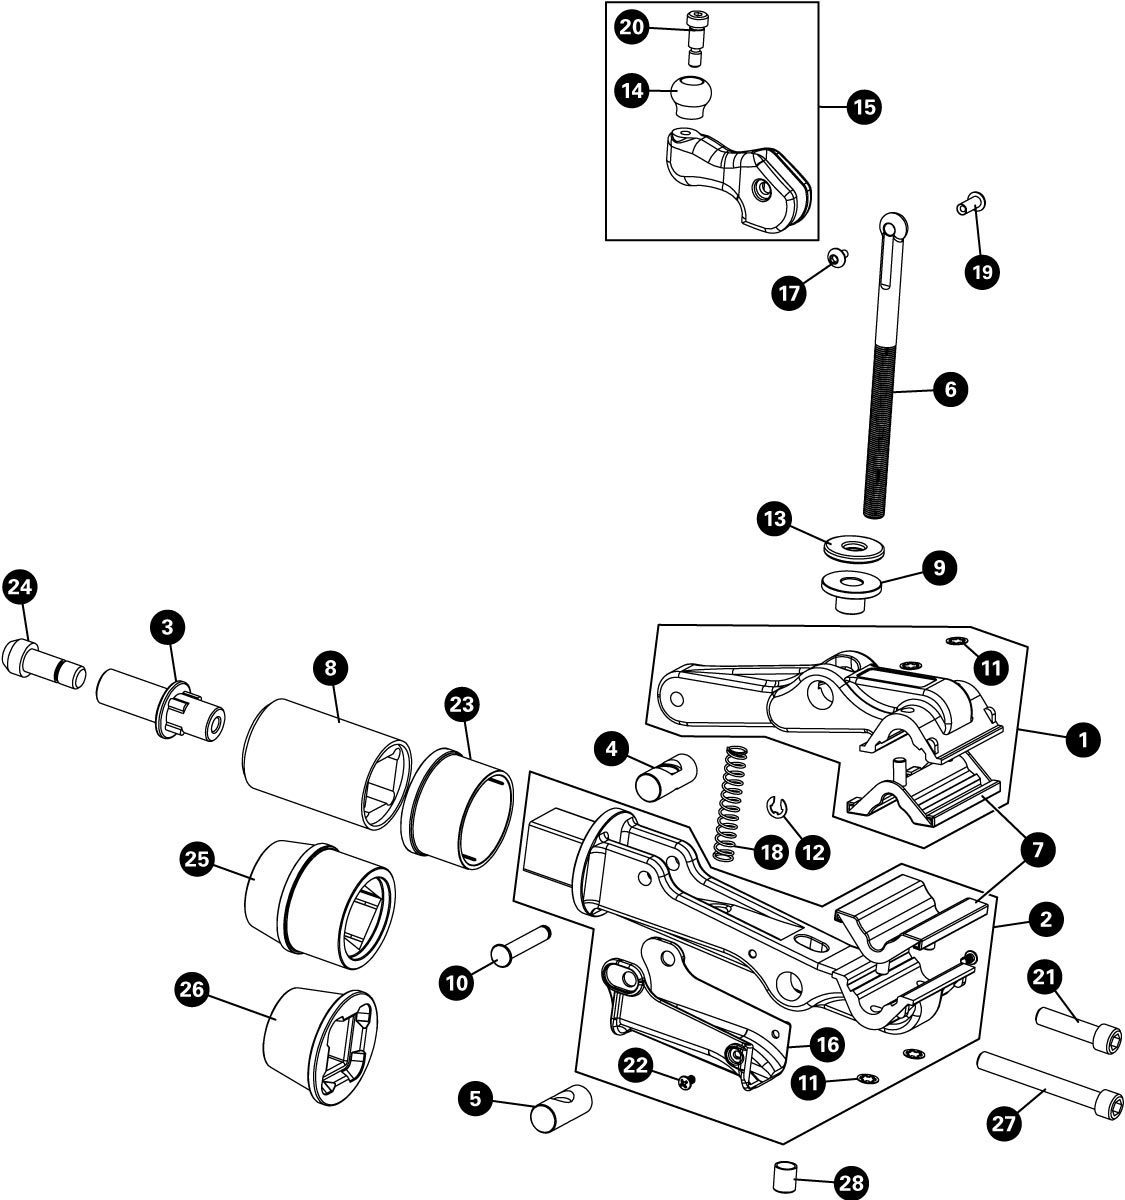 Parts diagram for 100-5D Professional Micro-Adjust Clamp, click to enlarge